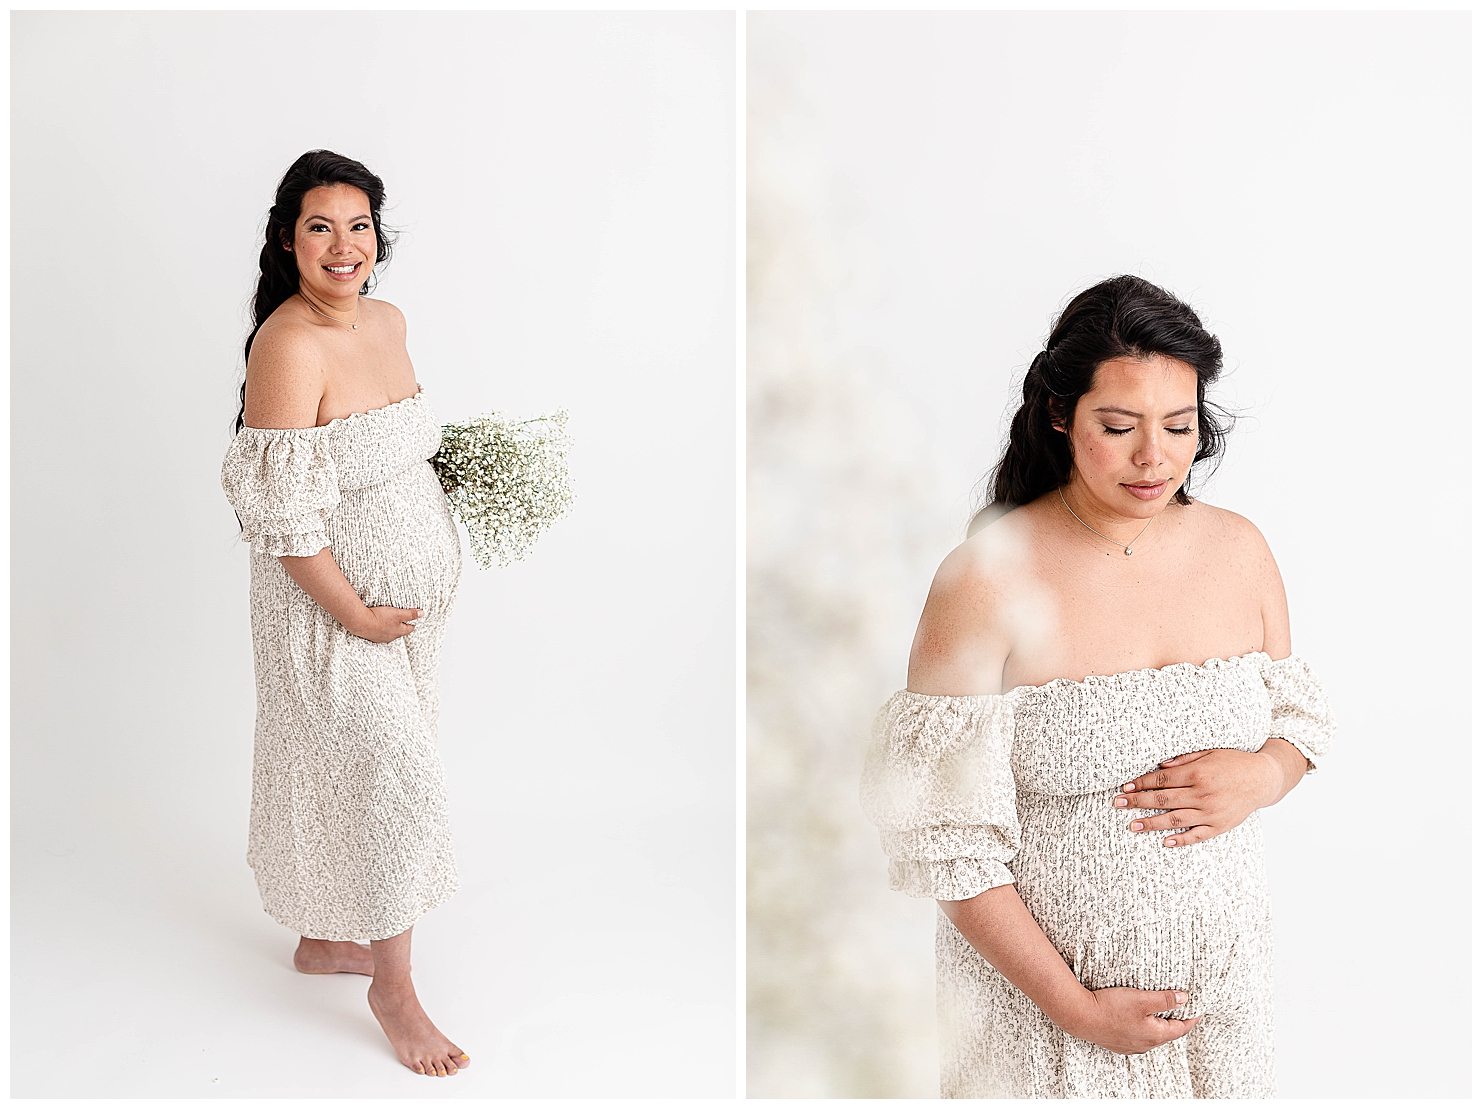 Pregnant woman in floral off-the-shoulder dress holding a bouquet of baby's breath in the image on the left and she is smiling at the camera. In the image on the right she is looking down at her belly. Photographs taken at all-white maternity portrait studio in Portland, Oregon.